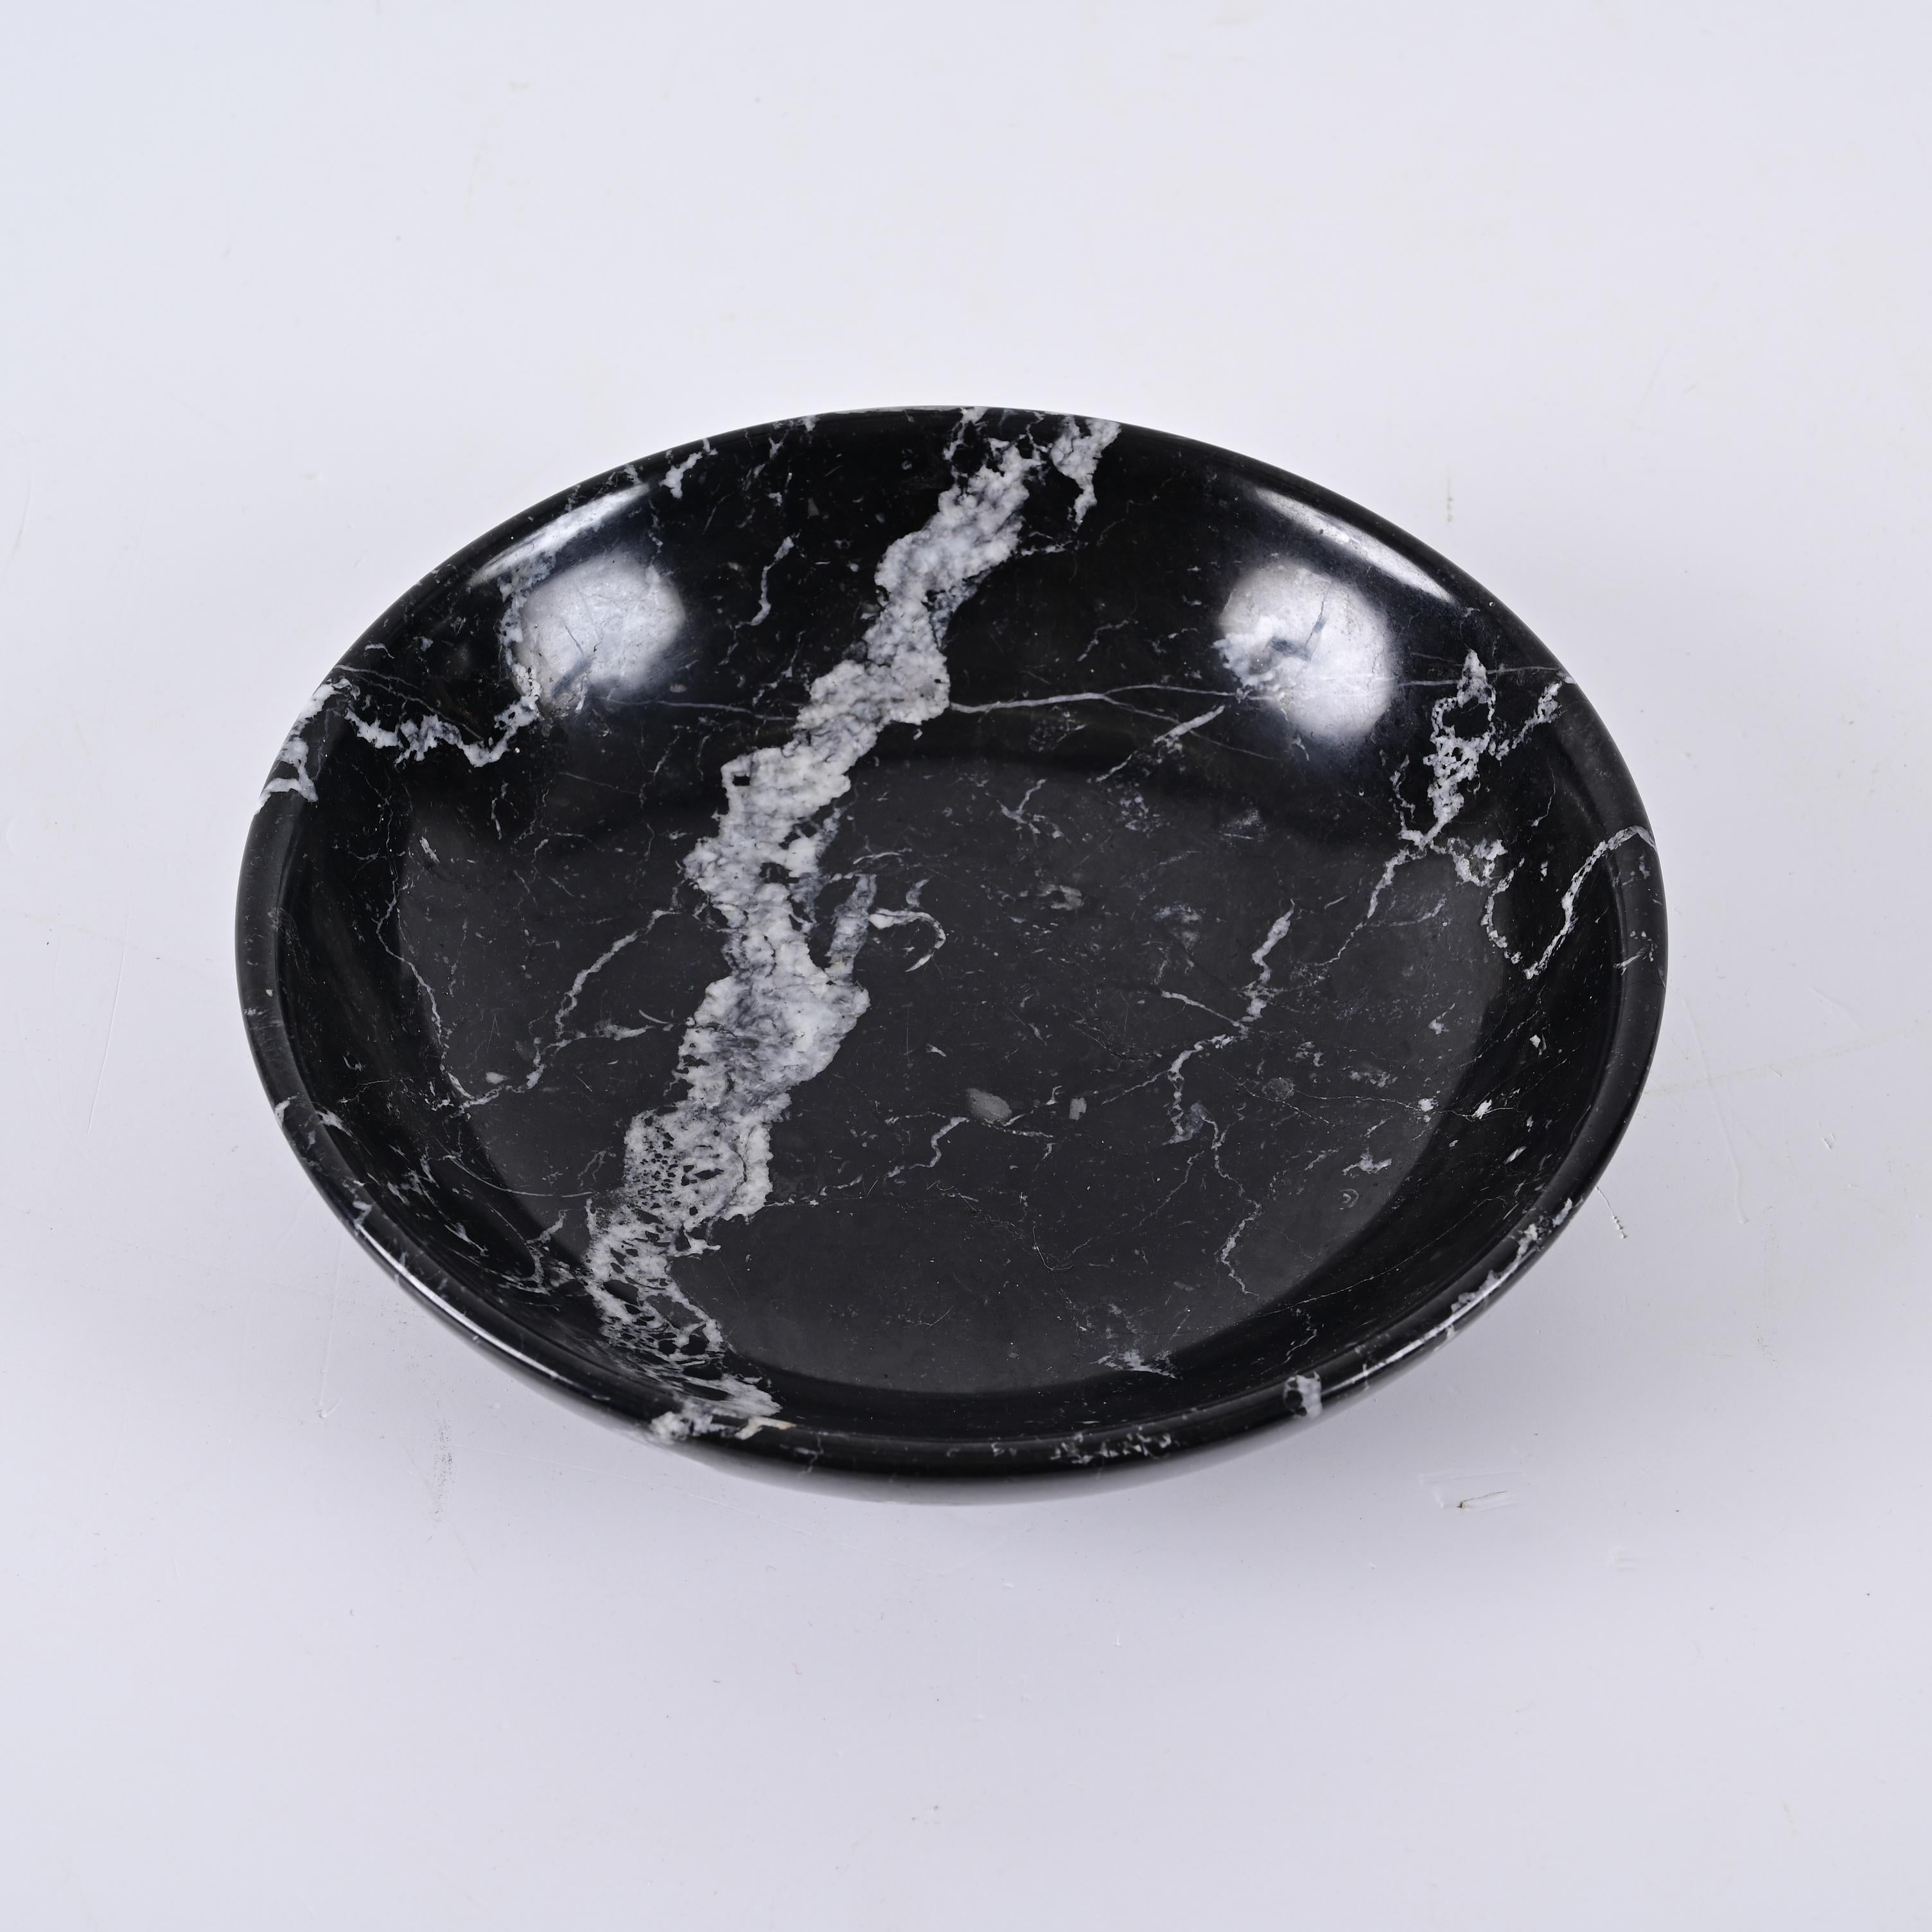 Mid-20th Century Midcentury Black Marble with White Grains Round Italian Decorative Bowl, 1950s For Sale